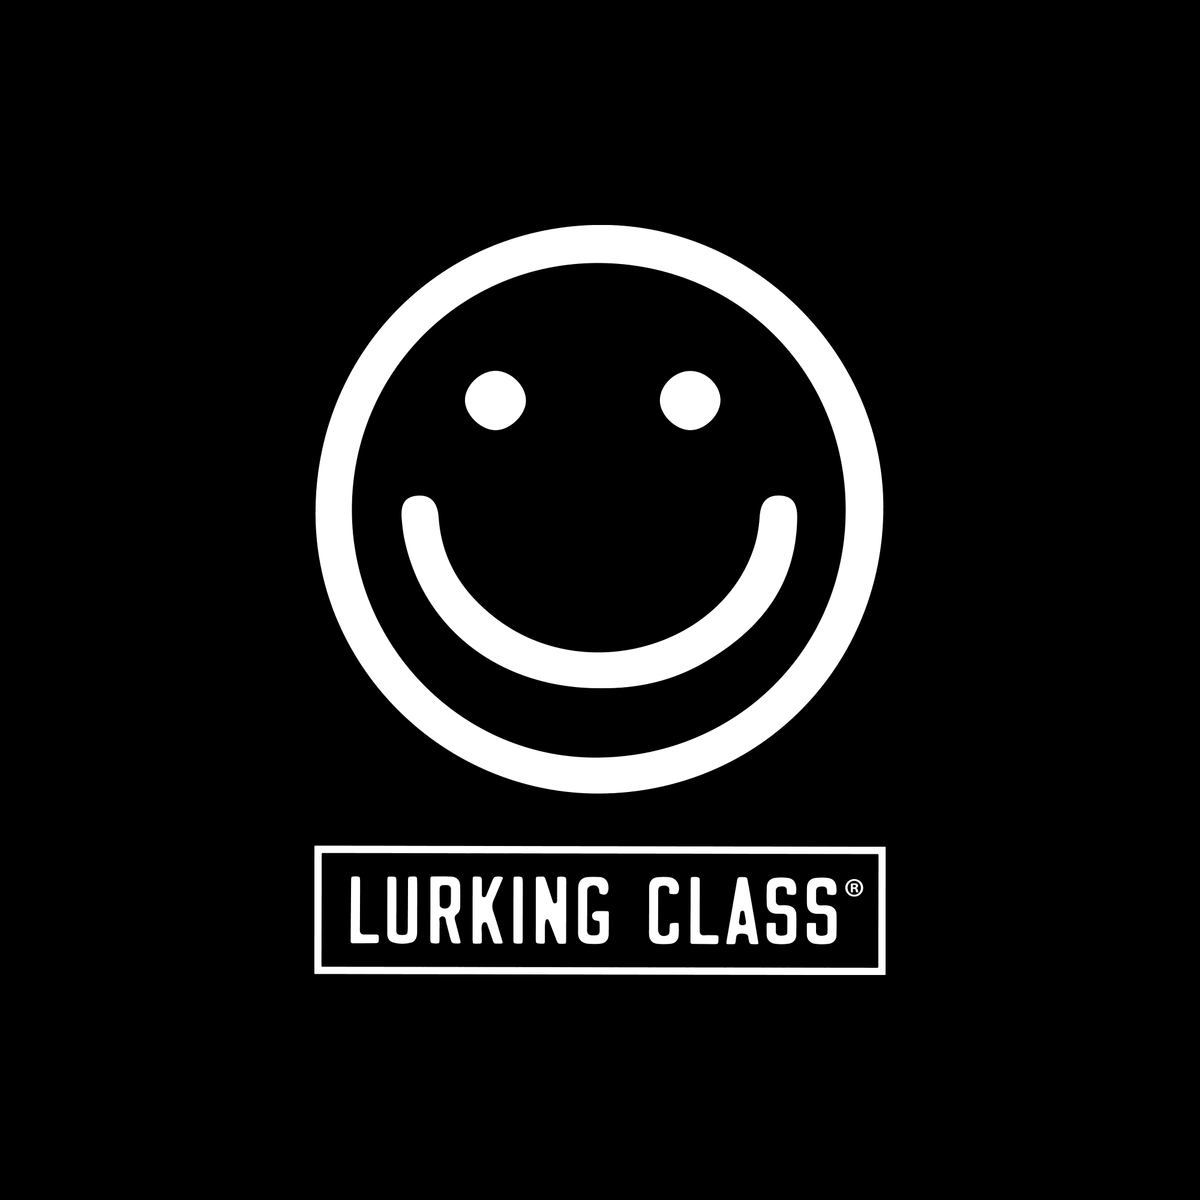 LURKING-CLASS-BY-SKETCHY-TANK-Smile-Tee - T-SHIRT - Synik Clothing - synikclothing.com